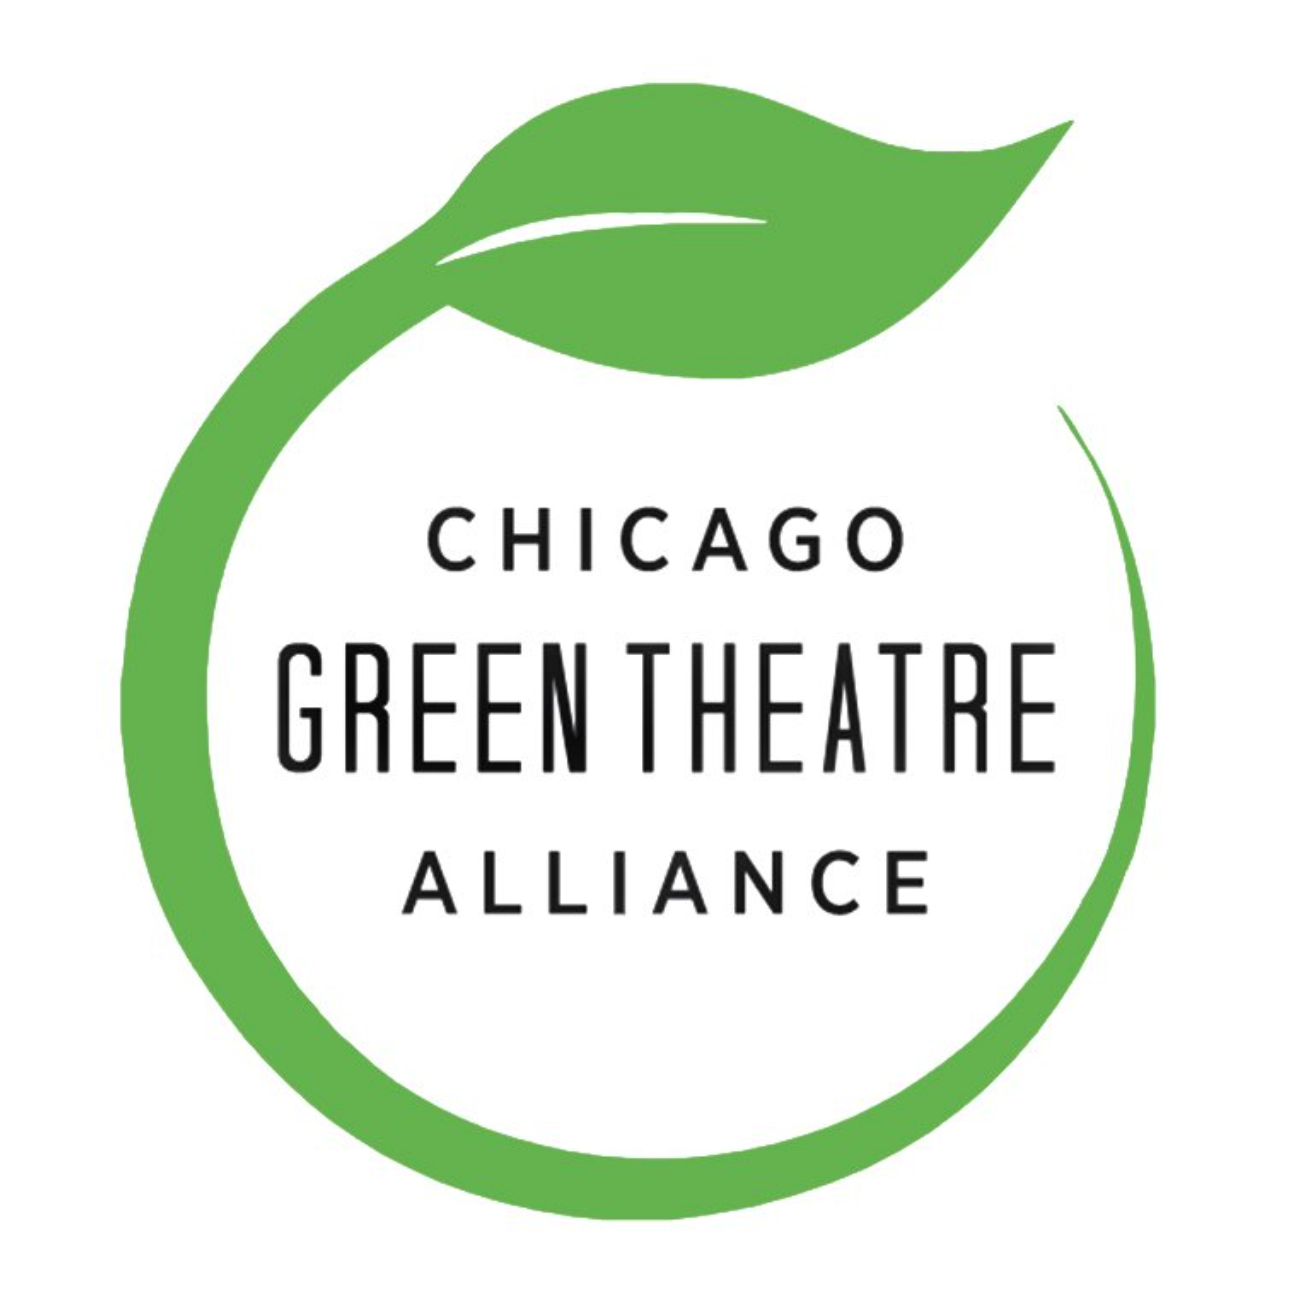 Chicago Green Theatre Alliance in black text on a white background with a green stemmed leaf circling the text